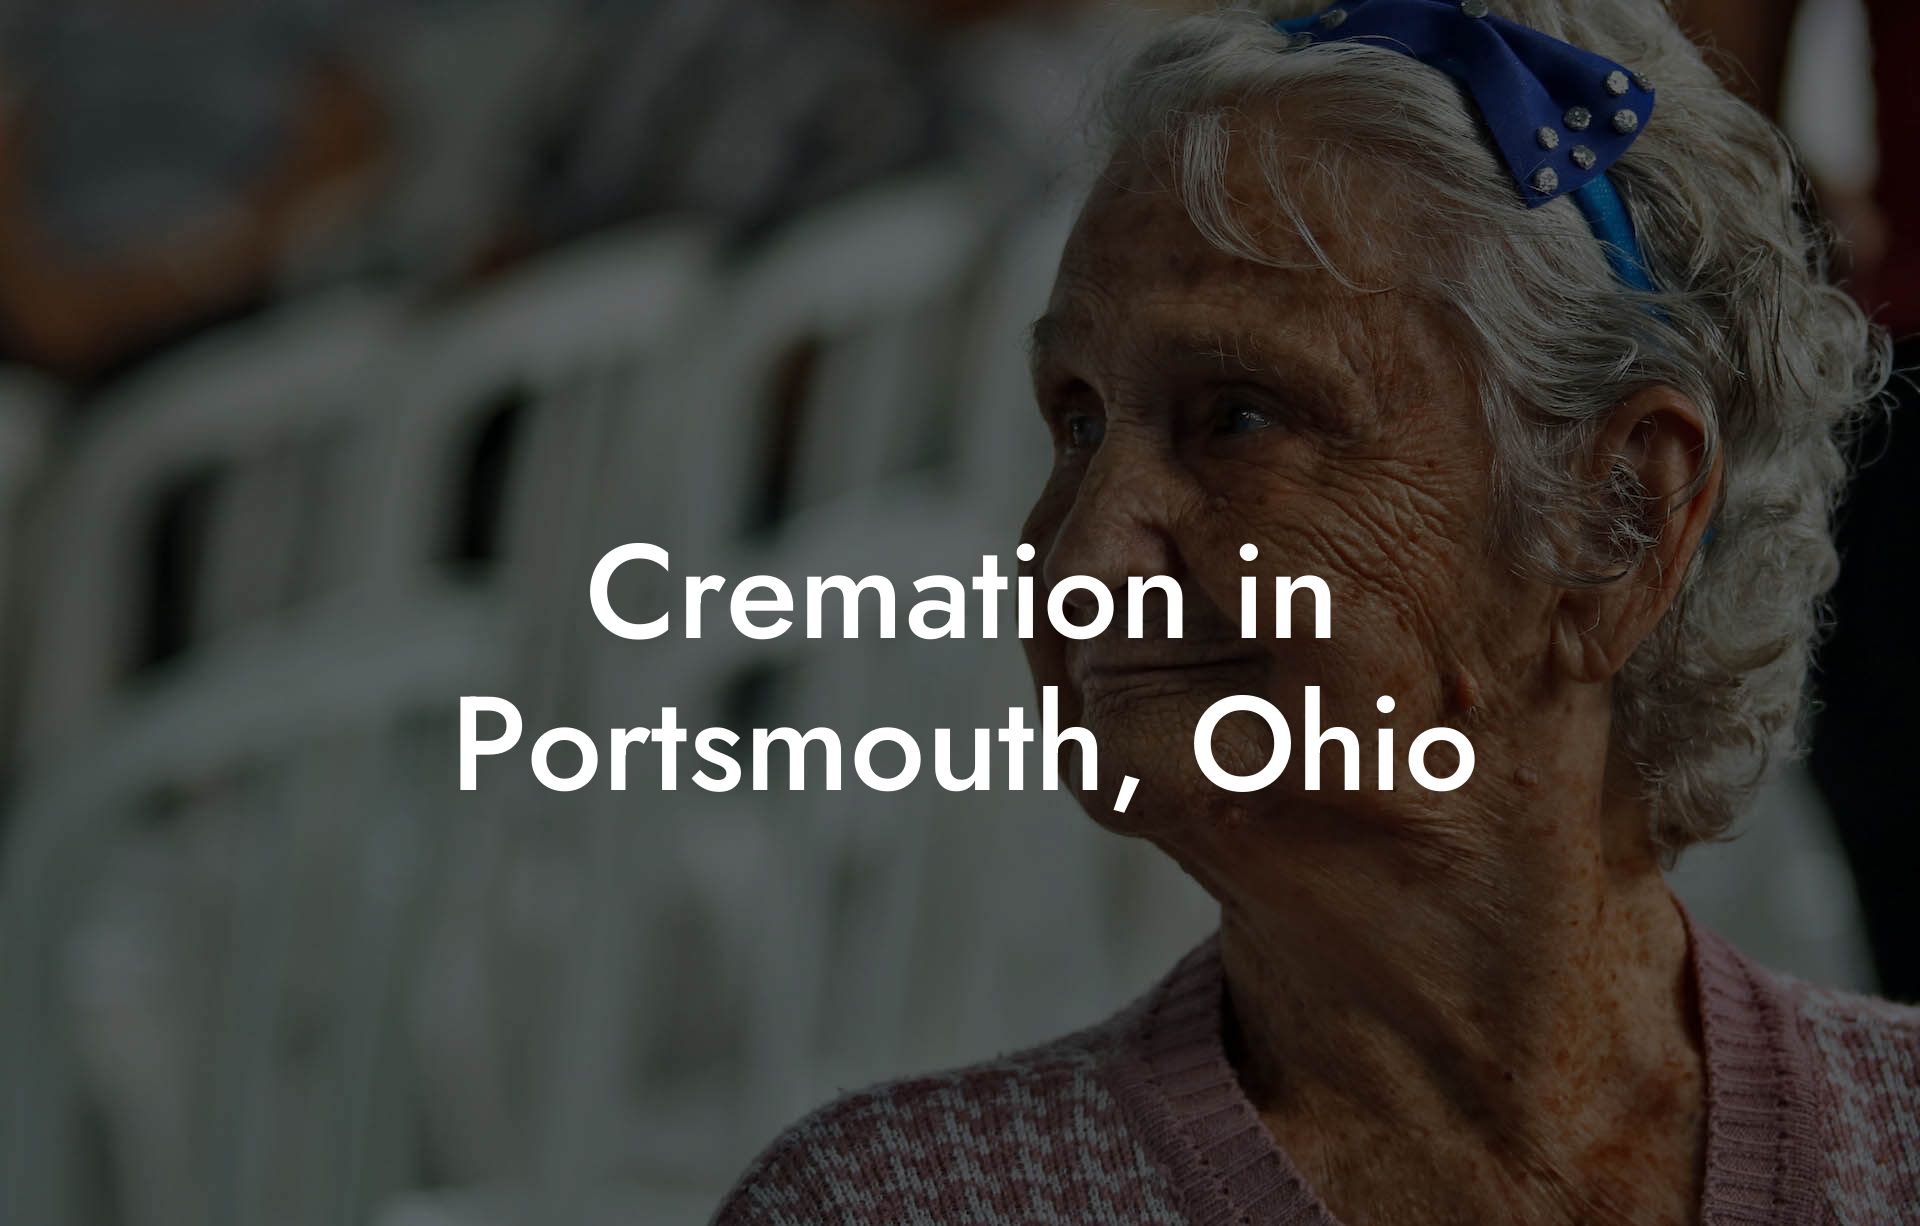 Cremation in Portsmouth, Ohio